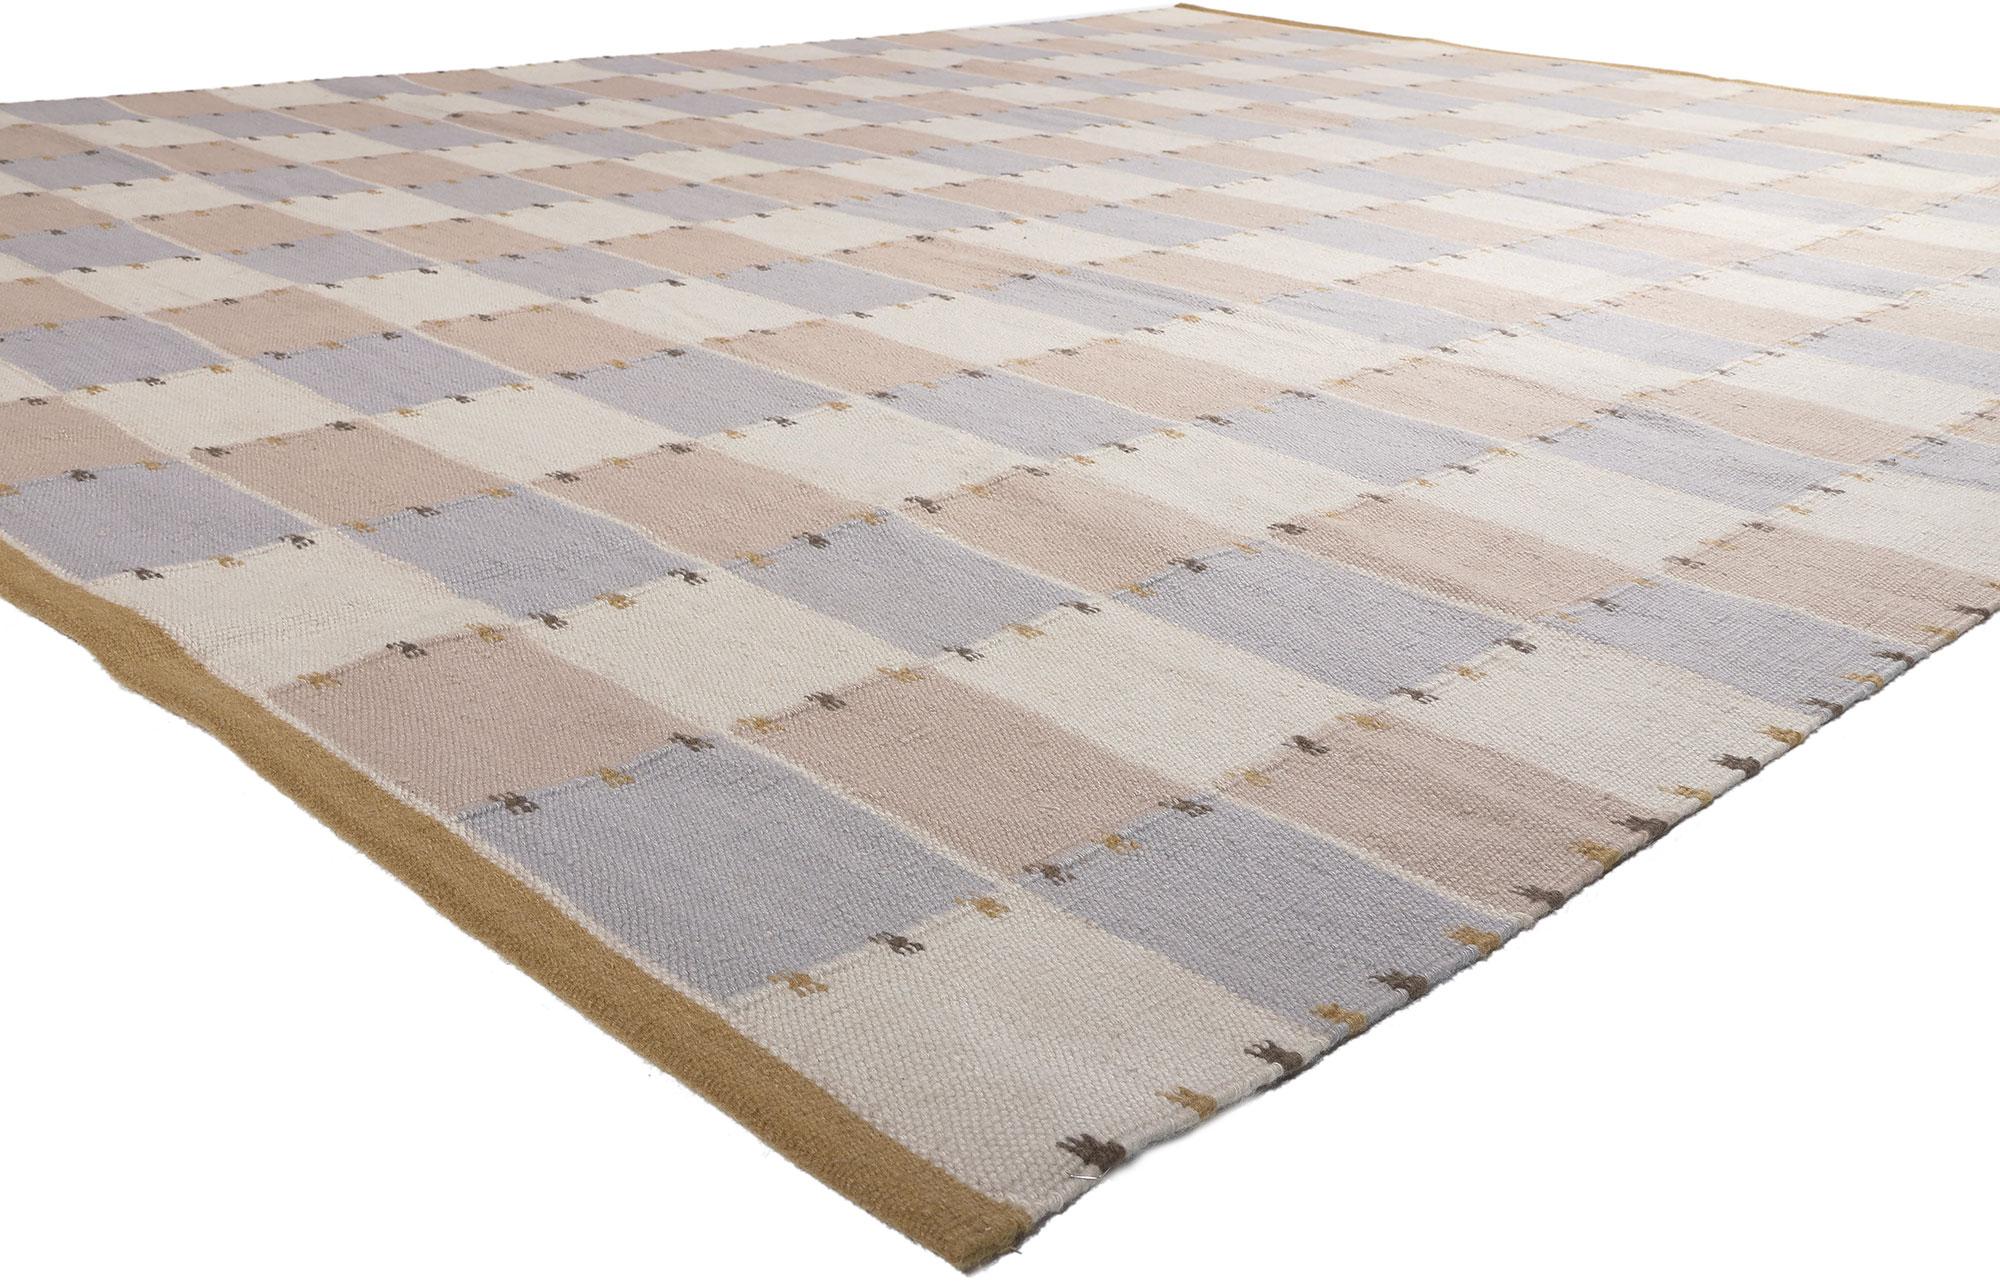 30950 New Swedish Inspired Kilim Rug, 10'03 x 12'09.
Scandinavian Modern meets Minimalist Cubism in this handwoven wool Swedish-inspired kilim rug. The simplistic linear design and minimal color scheme woven into this piece share a common theme of